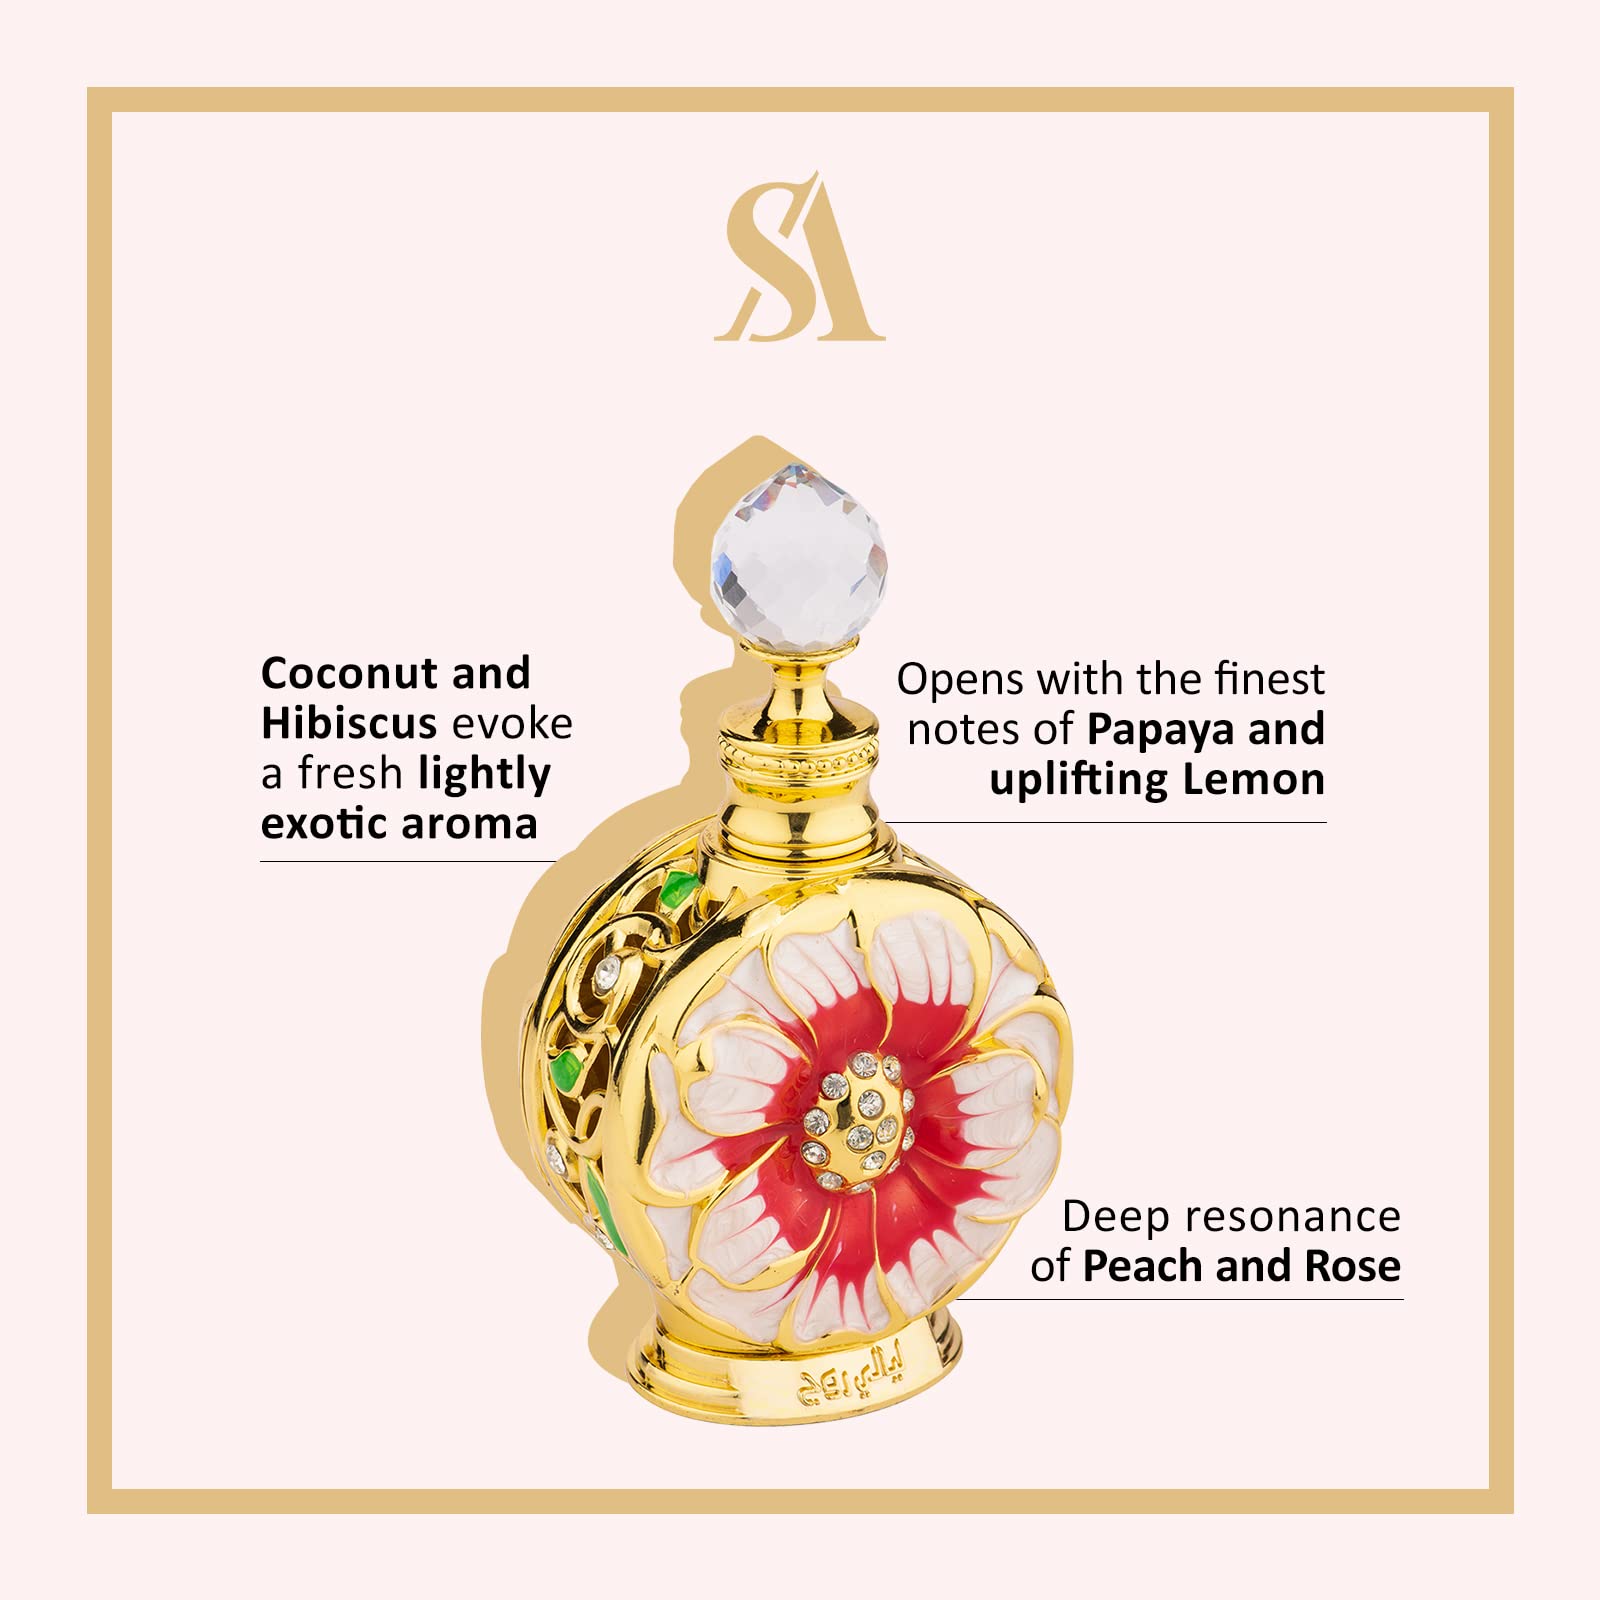 Swiss Arabian Layali Rouge - Luxury Products From Dubai - Lasting And Addictive Personal Perfume Oil Fragrance - A Seductive, Signature Aroma - The Luxurious Scent Of Arabia - 0.5 Oz